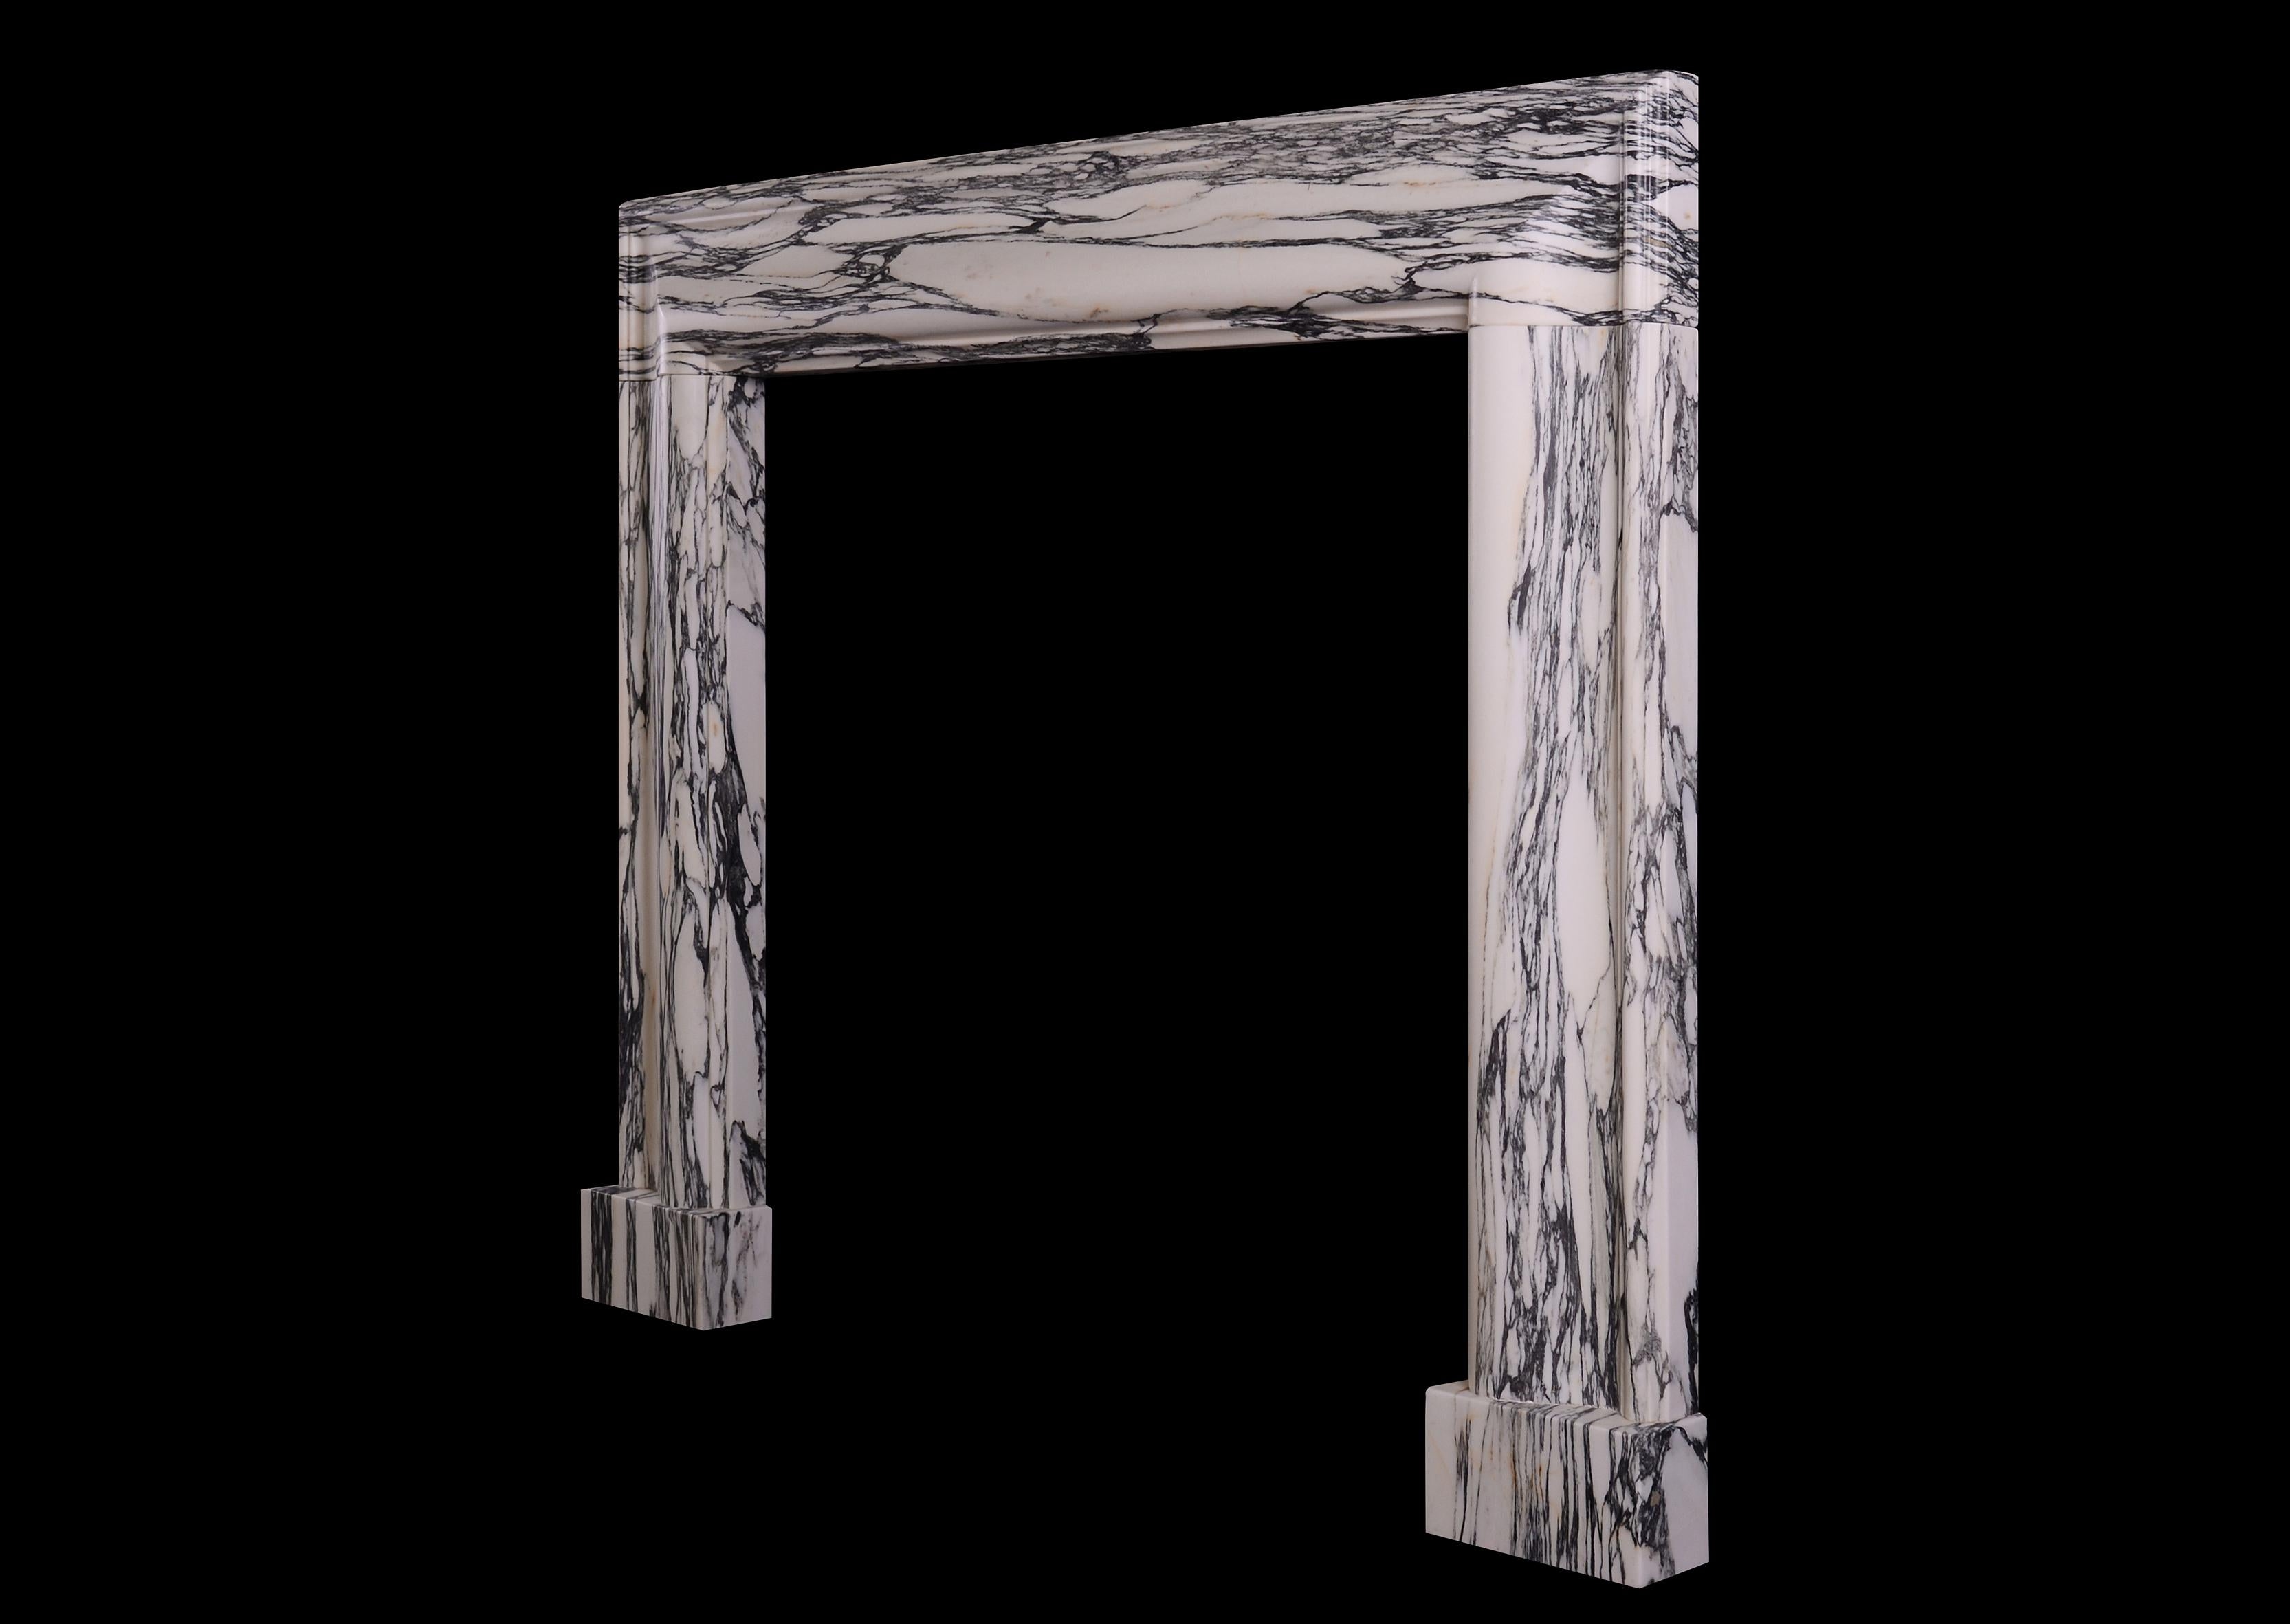 Moulded Bolection Fireplace in a Veined Marble 1